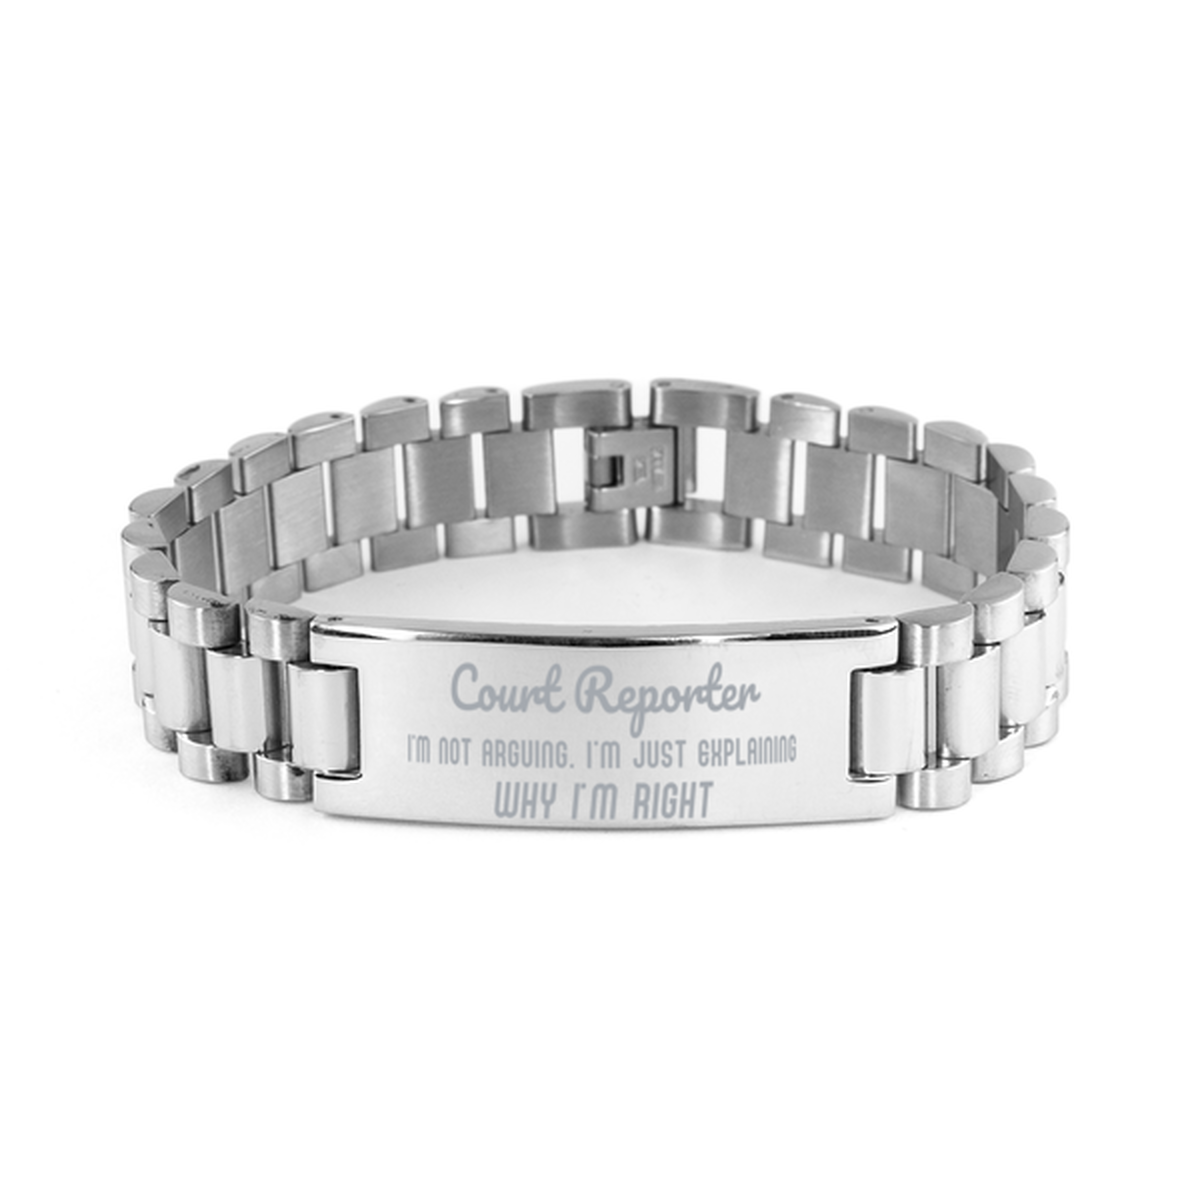 Court Reporter I'm not Arguing. I'm Just Explaining Why I'm RIGHT Ladder Stainless Steel Bracelet, Graduation Birthday Christmas Court Reporter Gifts For Court Reporter Funny Saying Quote Present for Men Women Coworker